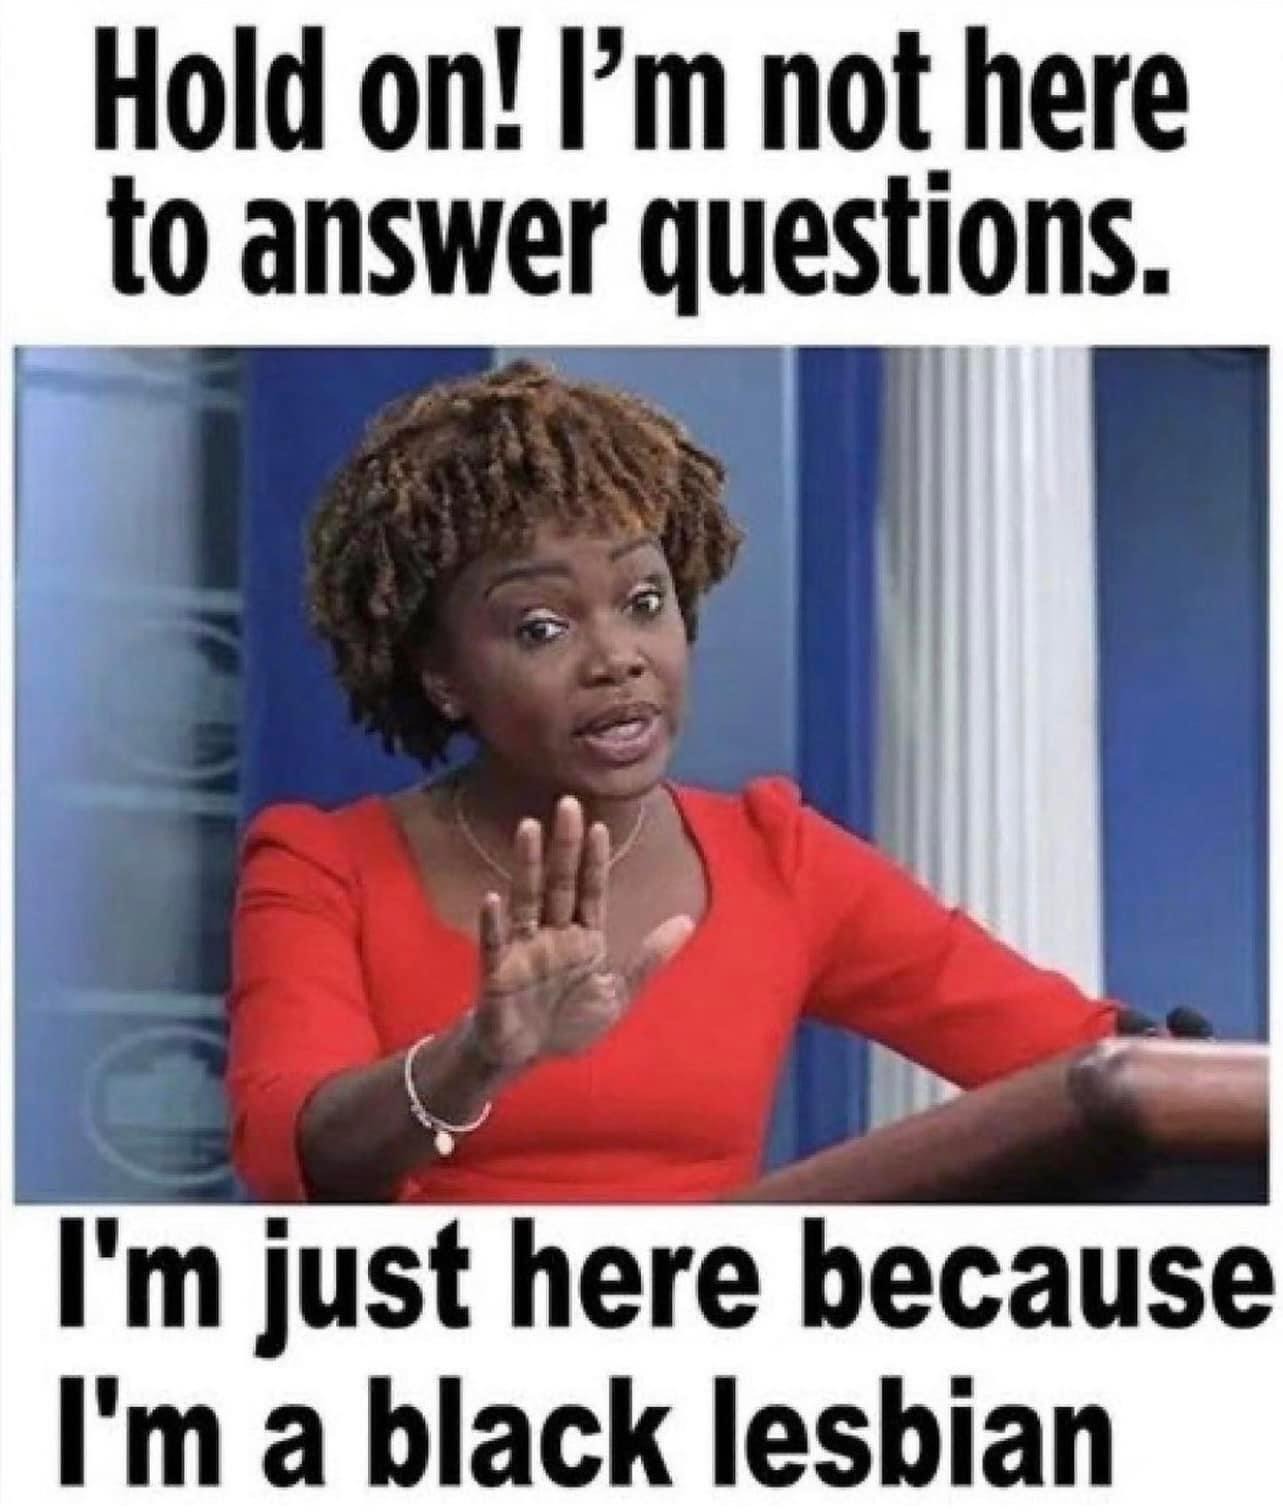 Hold on! I'm not here to answer questions. | image tagged in black lesbian,karine jean-pierre,lickety split,kjp | made w/ Imgflip meme maker